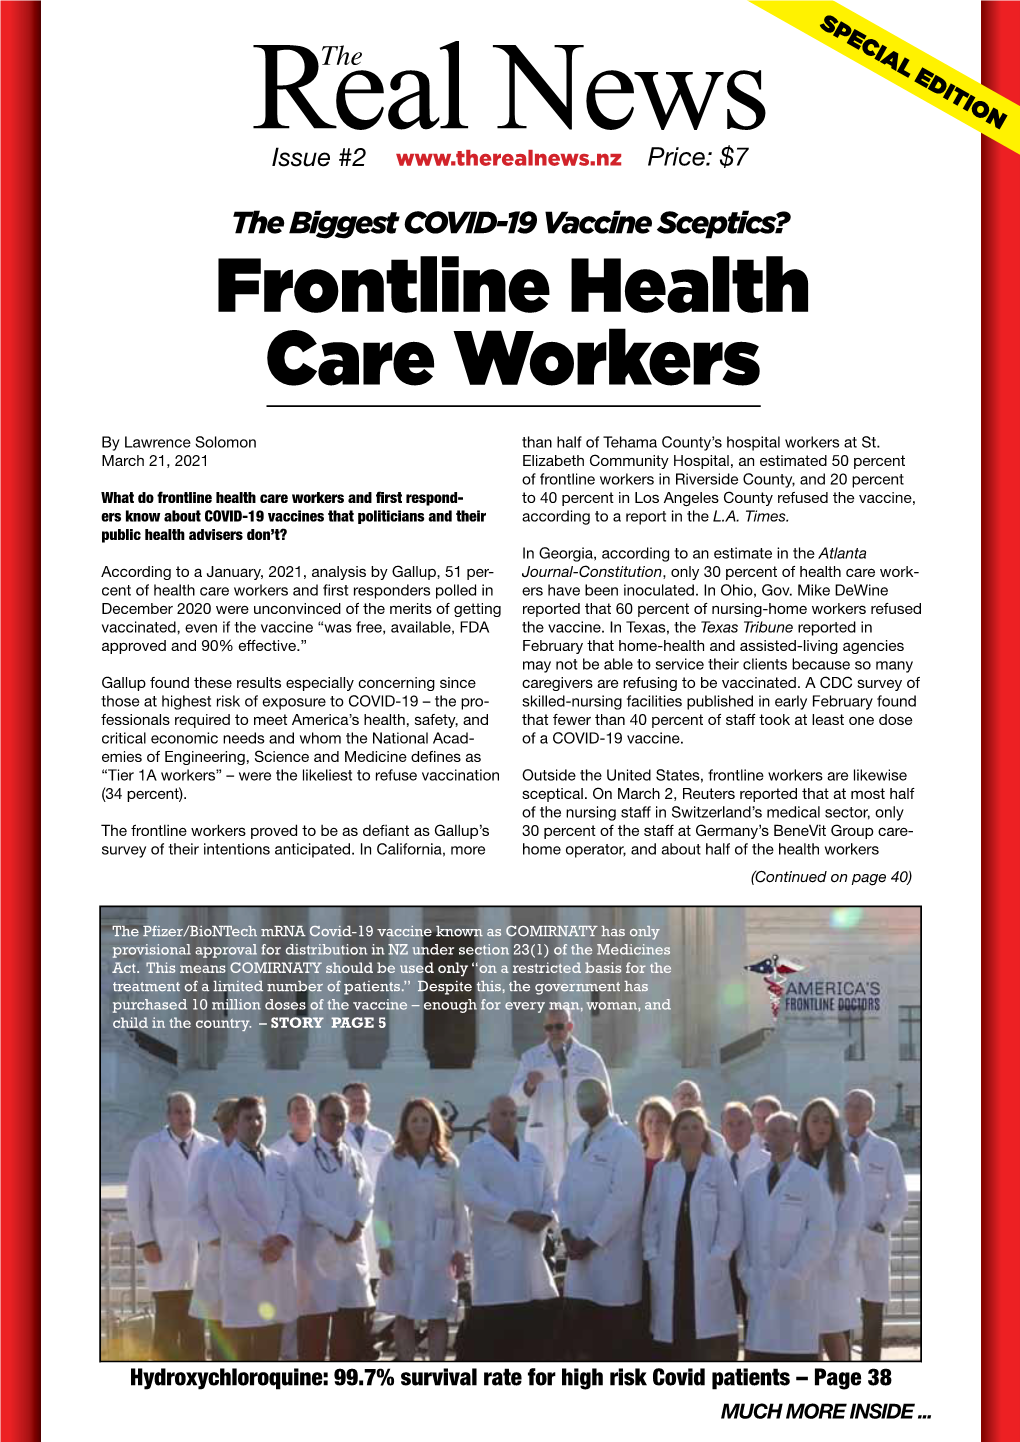 Frontline Health Care Workers